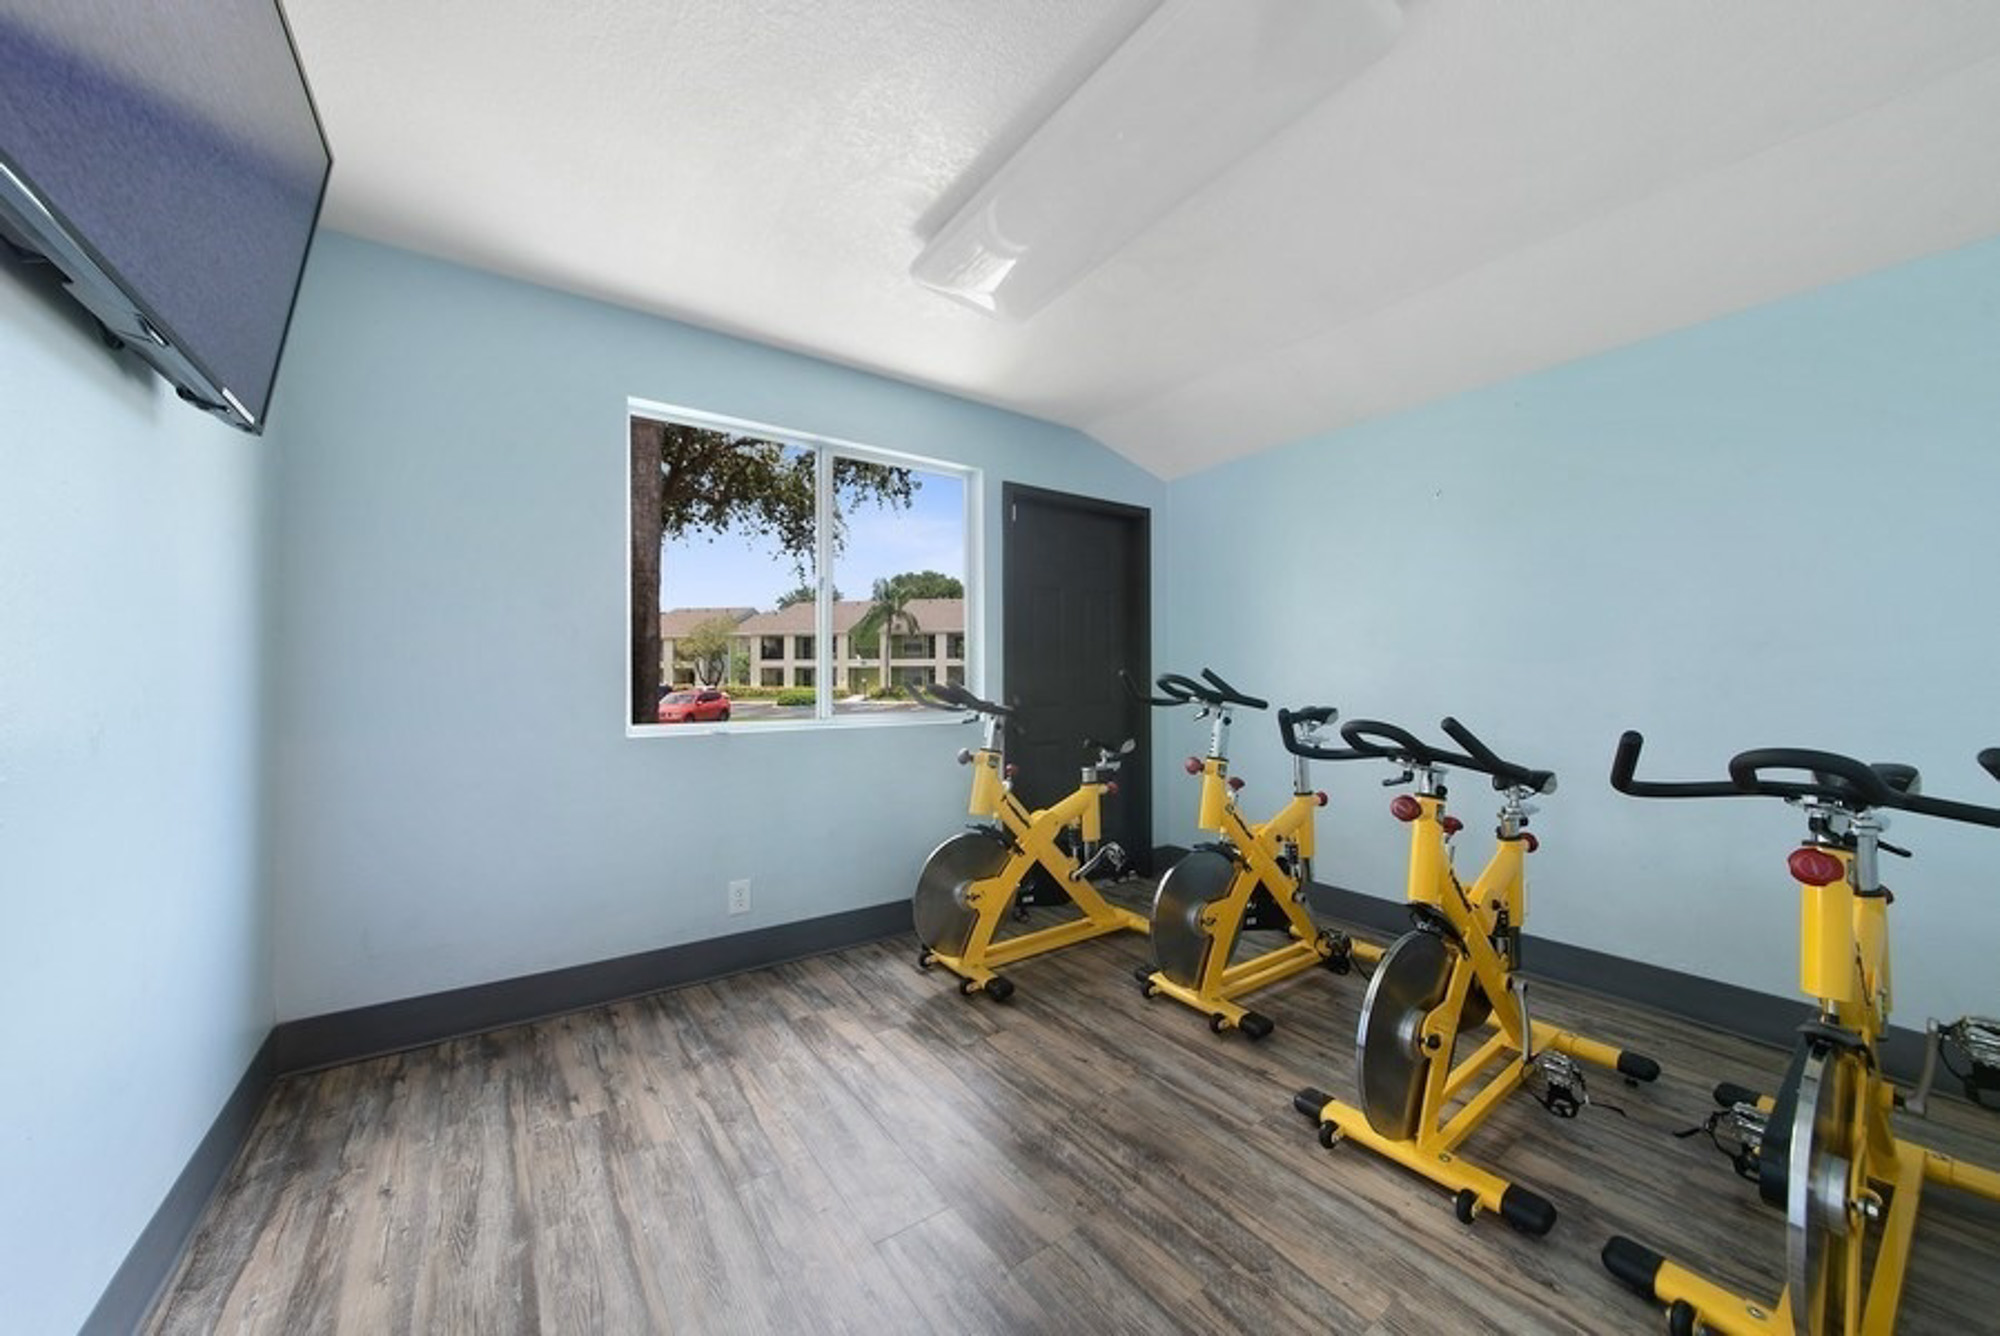 The fitness center at Turtle Cove in West Palm Beach, FL.